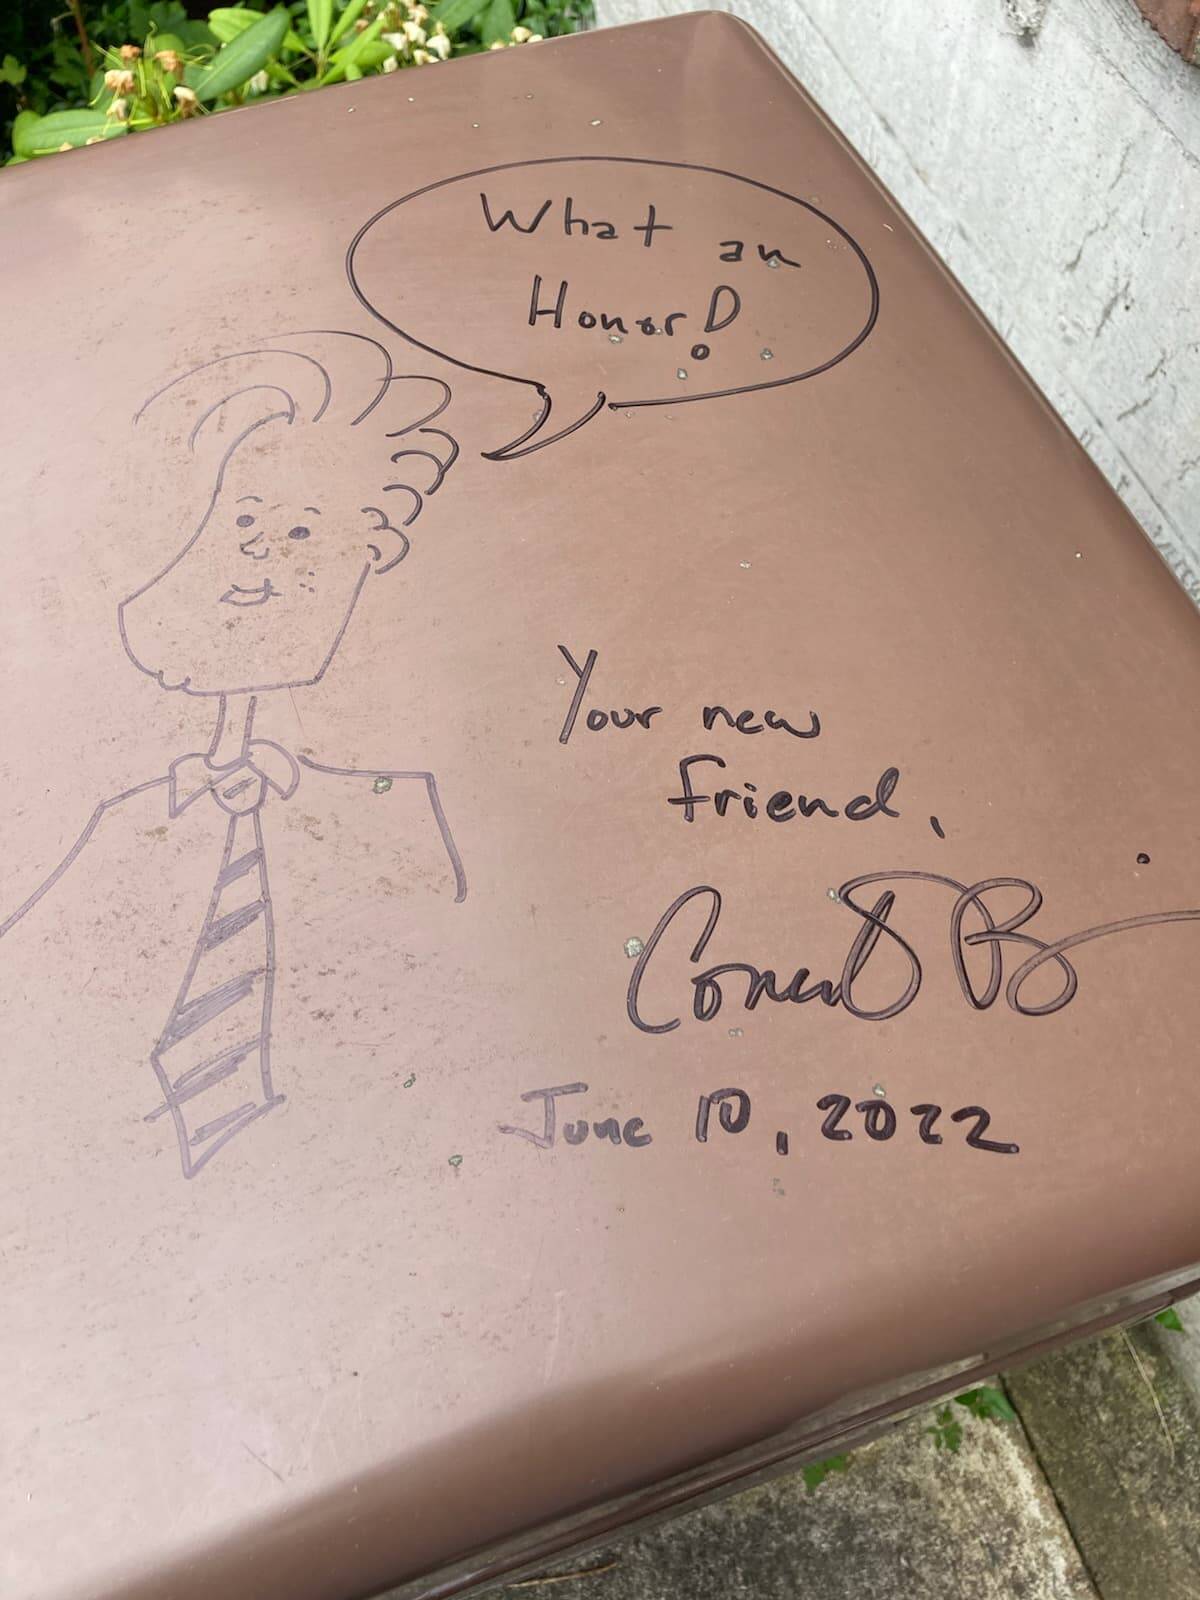 Photo by Craig Cyr
During his visit, Conan O’Brien dedicated a trash can outside of Langley City Hall.